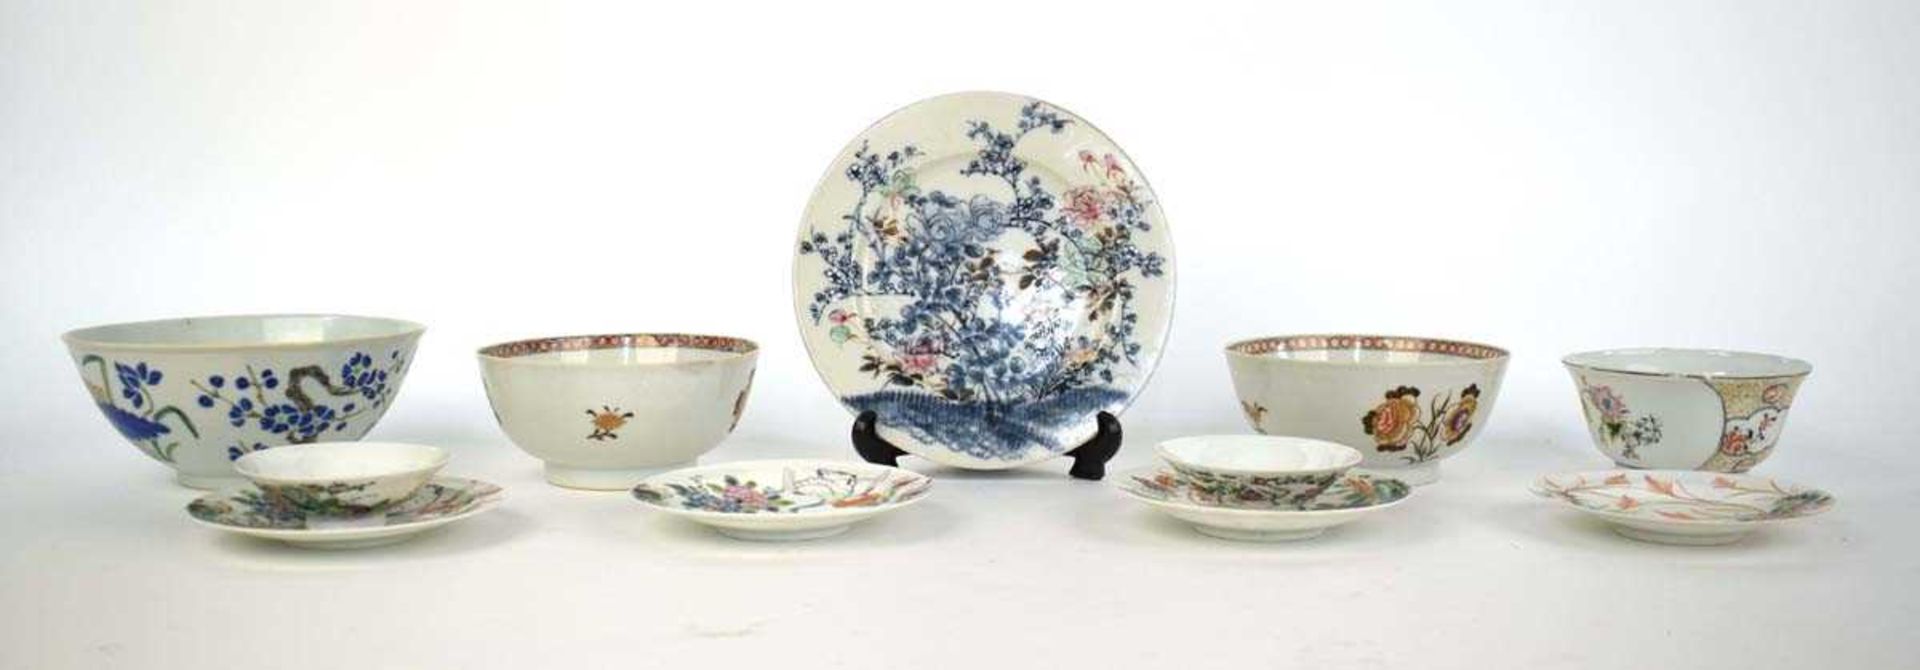 A group of Japanese eggshell porcelain including five saucers, each decorated in coloured enamels